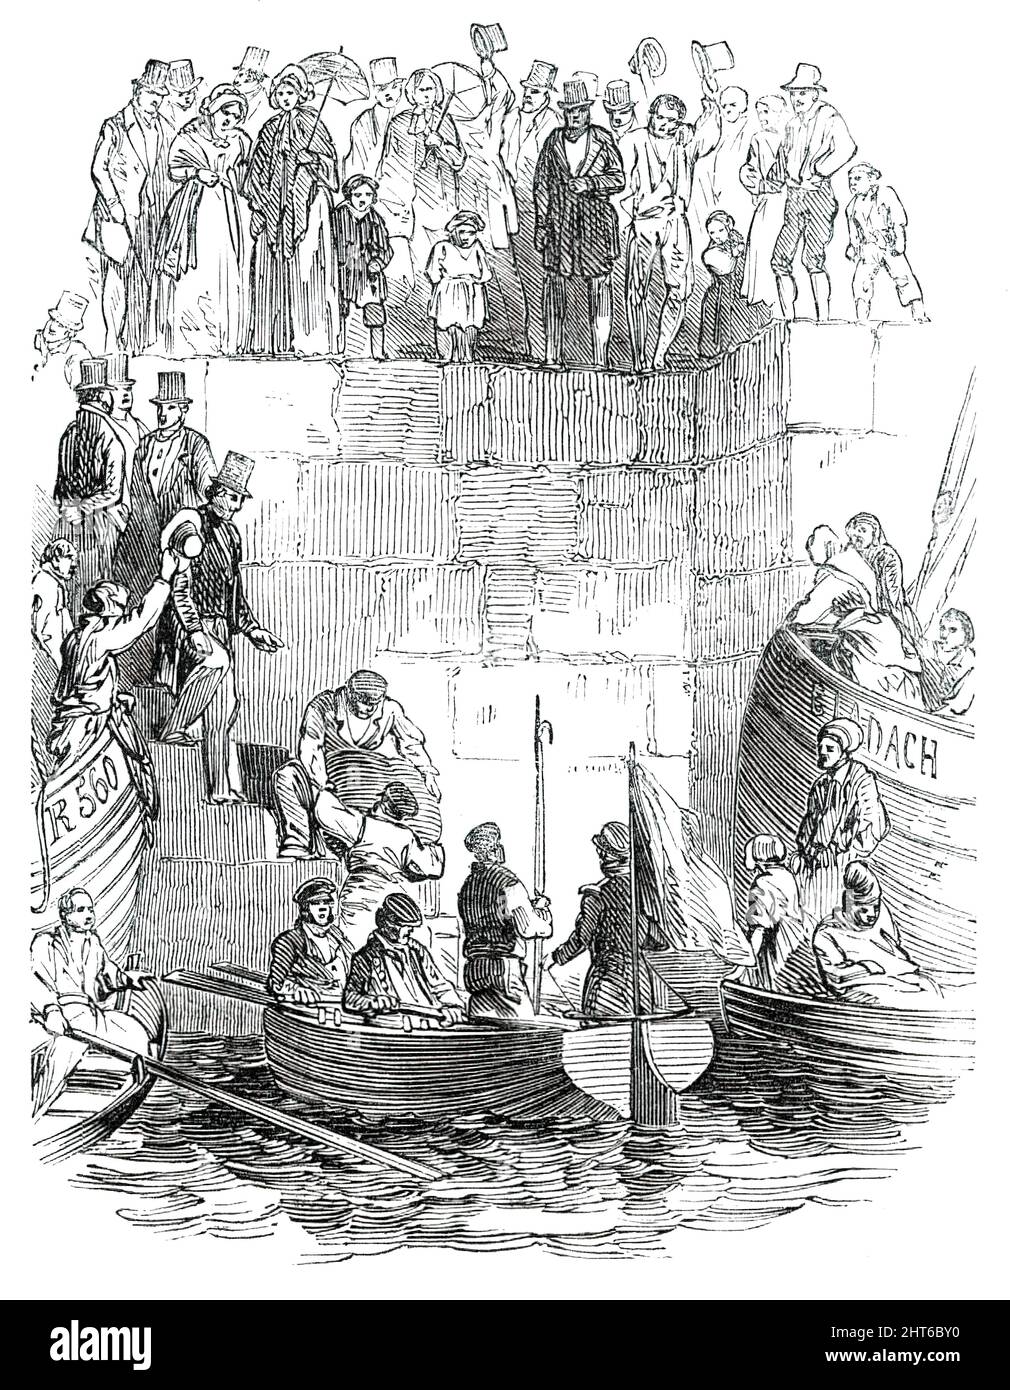 Putting the Mail on Board the &quot;Viceroy&quot;, 1850. Mail sacks being loaded at Galway in Ireland, to be carried across the Atlantic Ocean. 'At twenty minutes past six the express [train] arrived from Dublin, with a considerable mail, and was handed over to the coast-guard boat...'. The sacks were '...towed off towards the ship amidst the acclamations of thousands, and [were] then handed over to the captain, who instantly put his men to the capstan, and at a quarter to ten o'clock the Viceroy was fairly under weigh, amidst the prolonged cheering of the multitudes assembled upon every avail Stock Photo